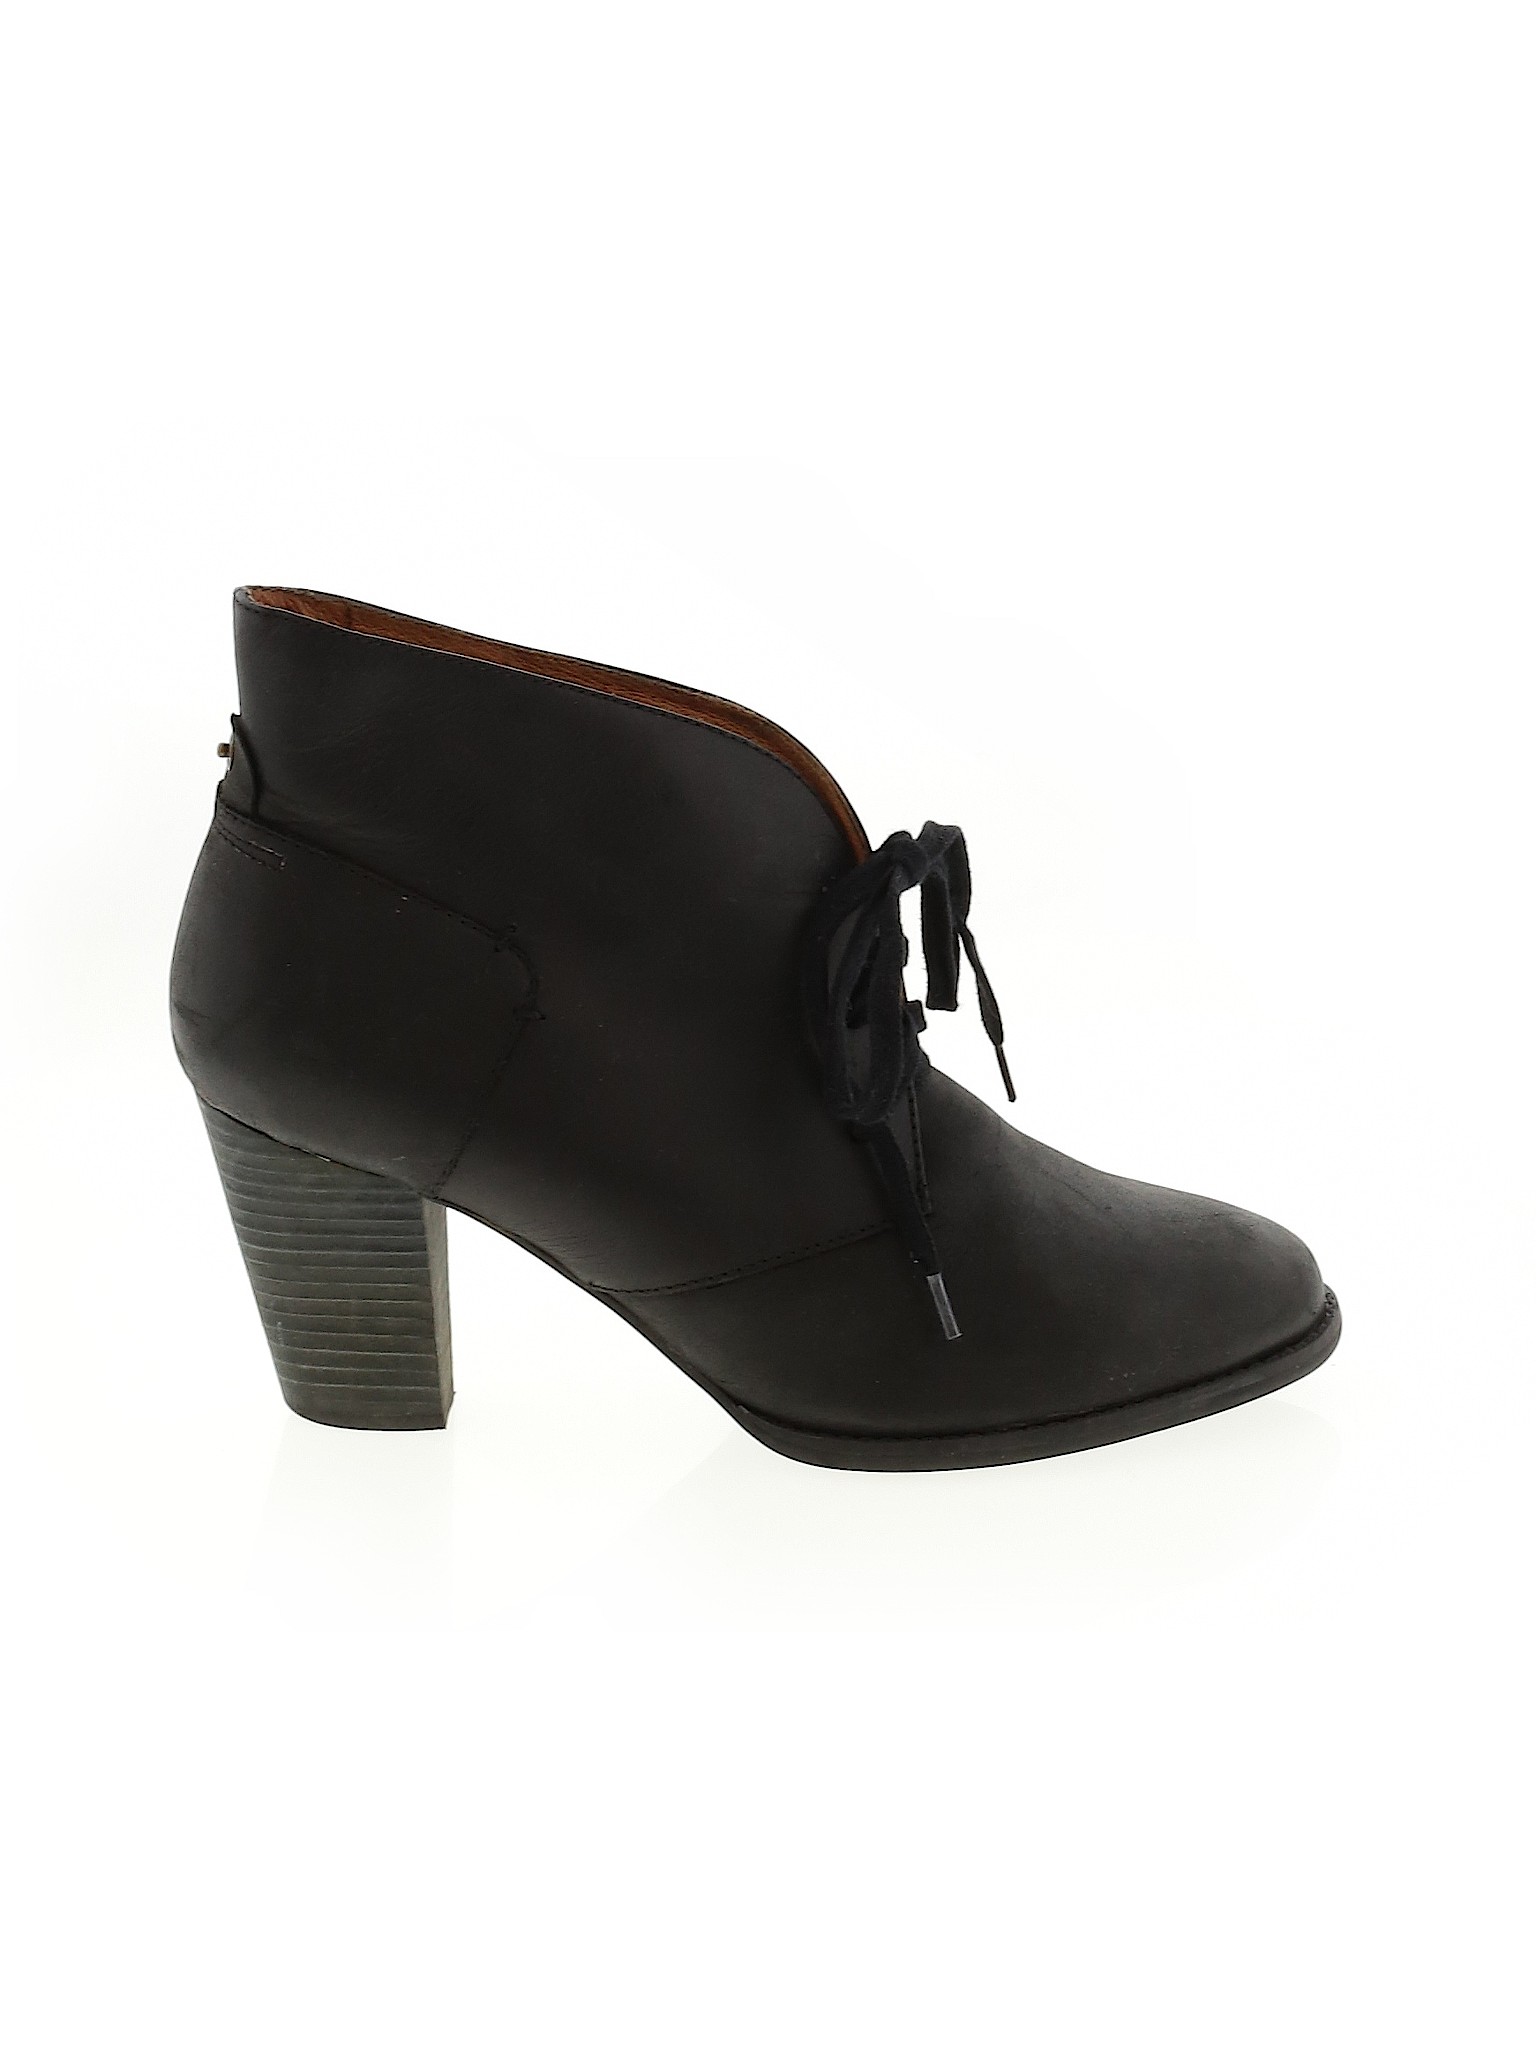 clarks womens black ankle boots